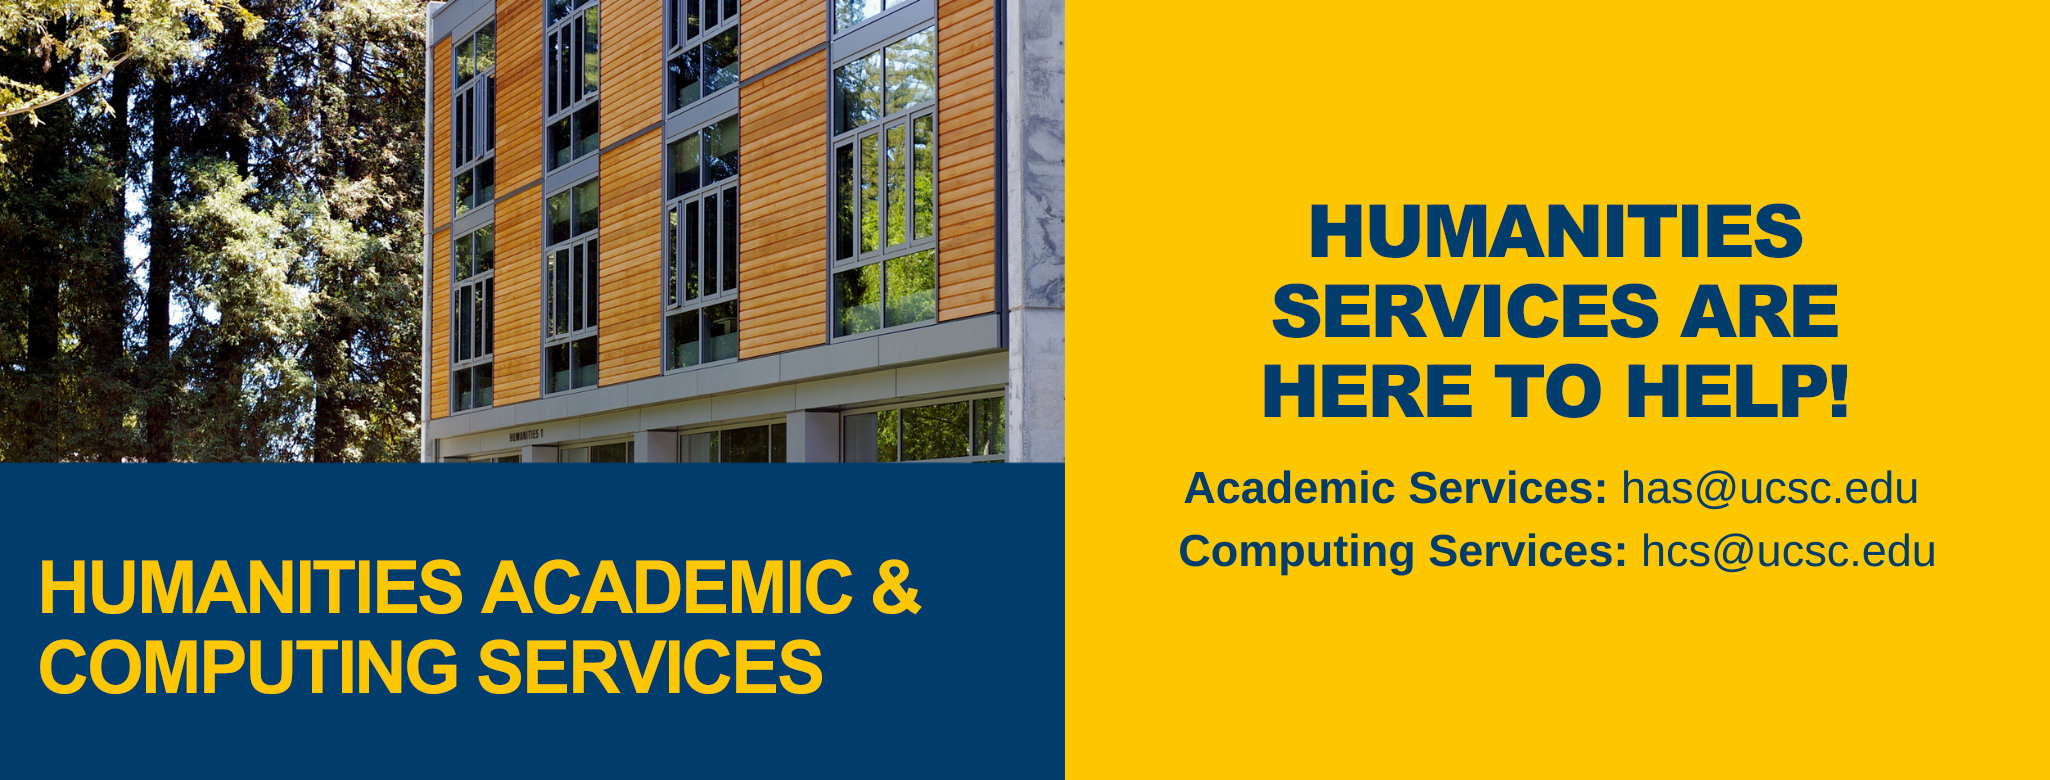 Humanities Academic Services staff are currently remote but you can email has@ucsc.edu with any questions.